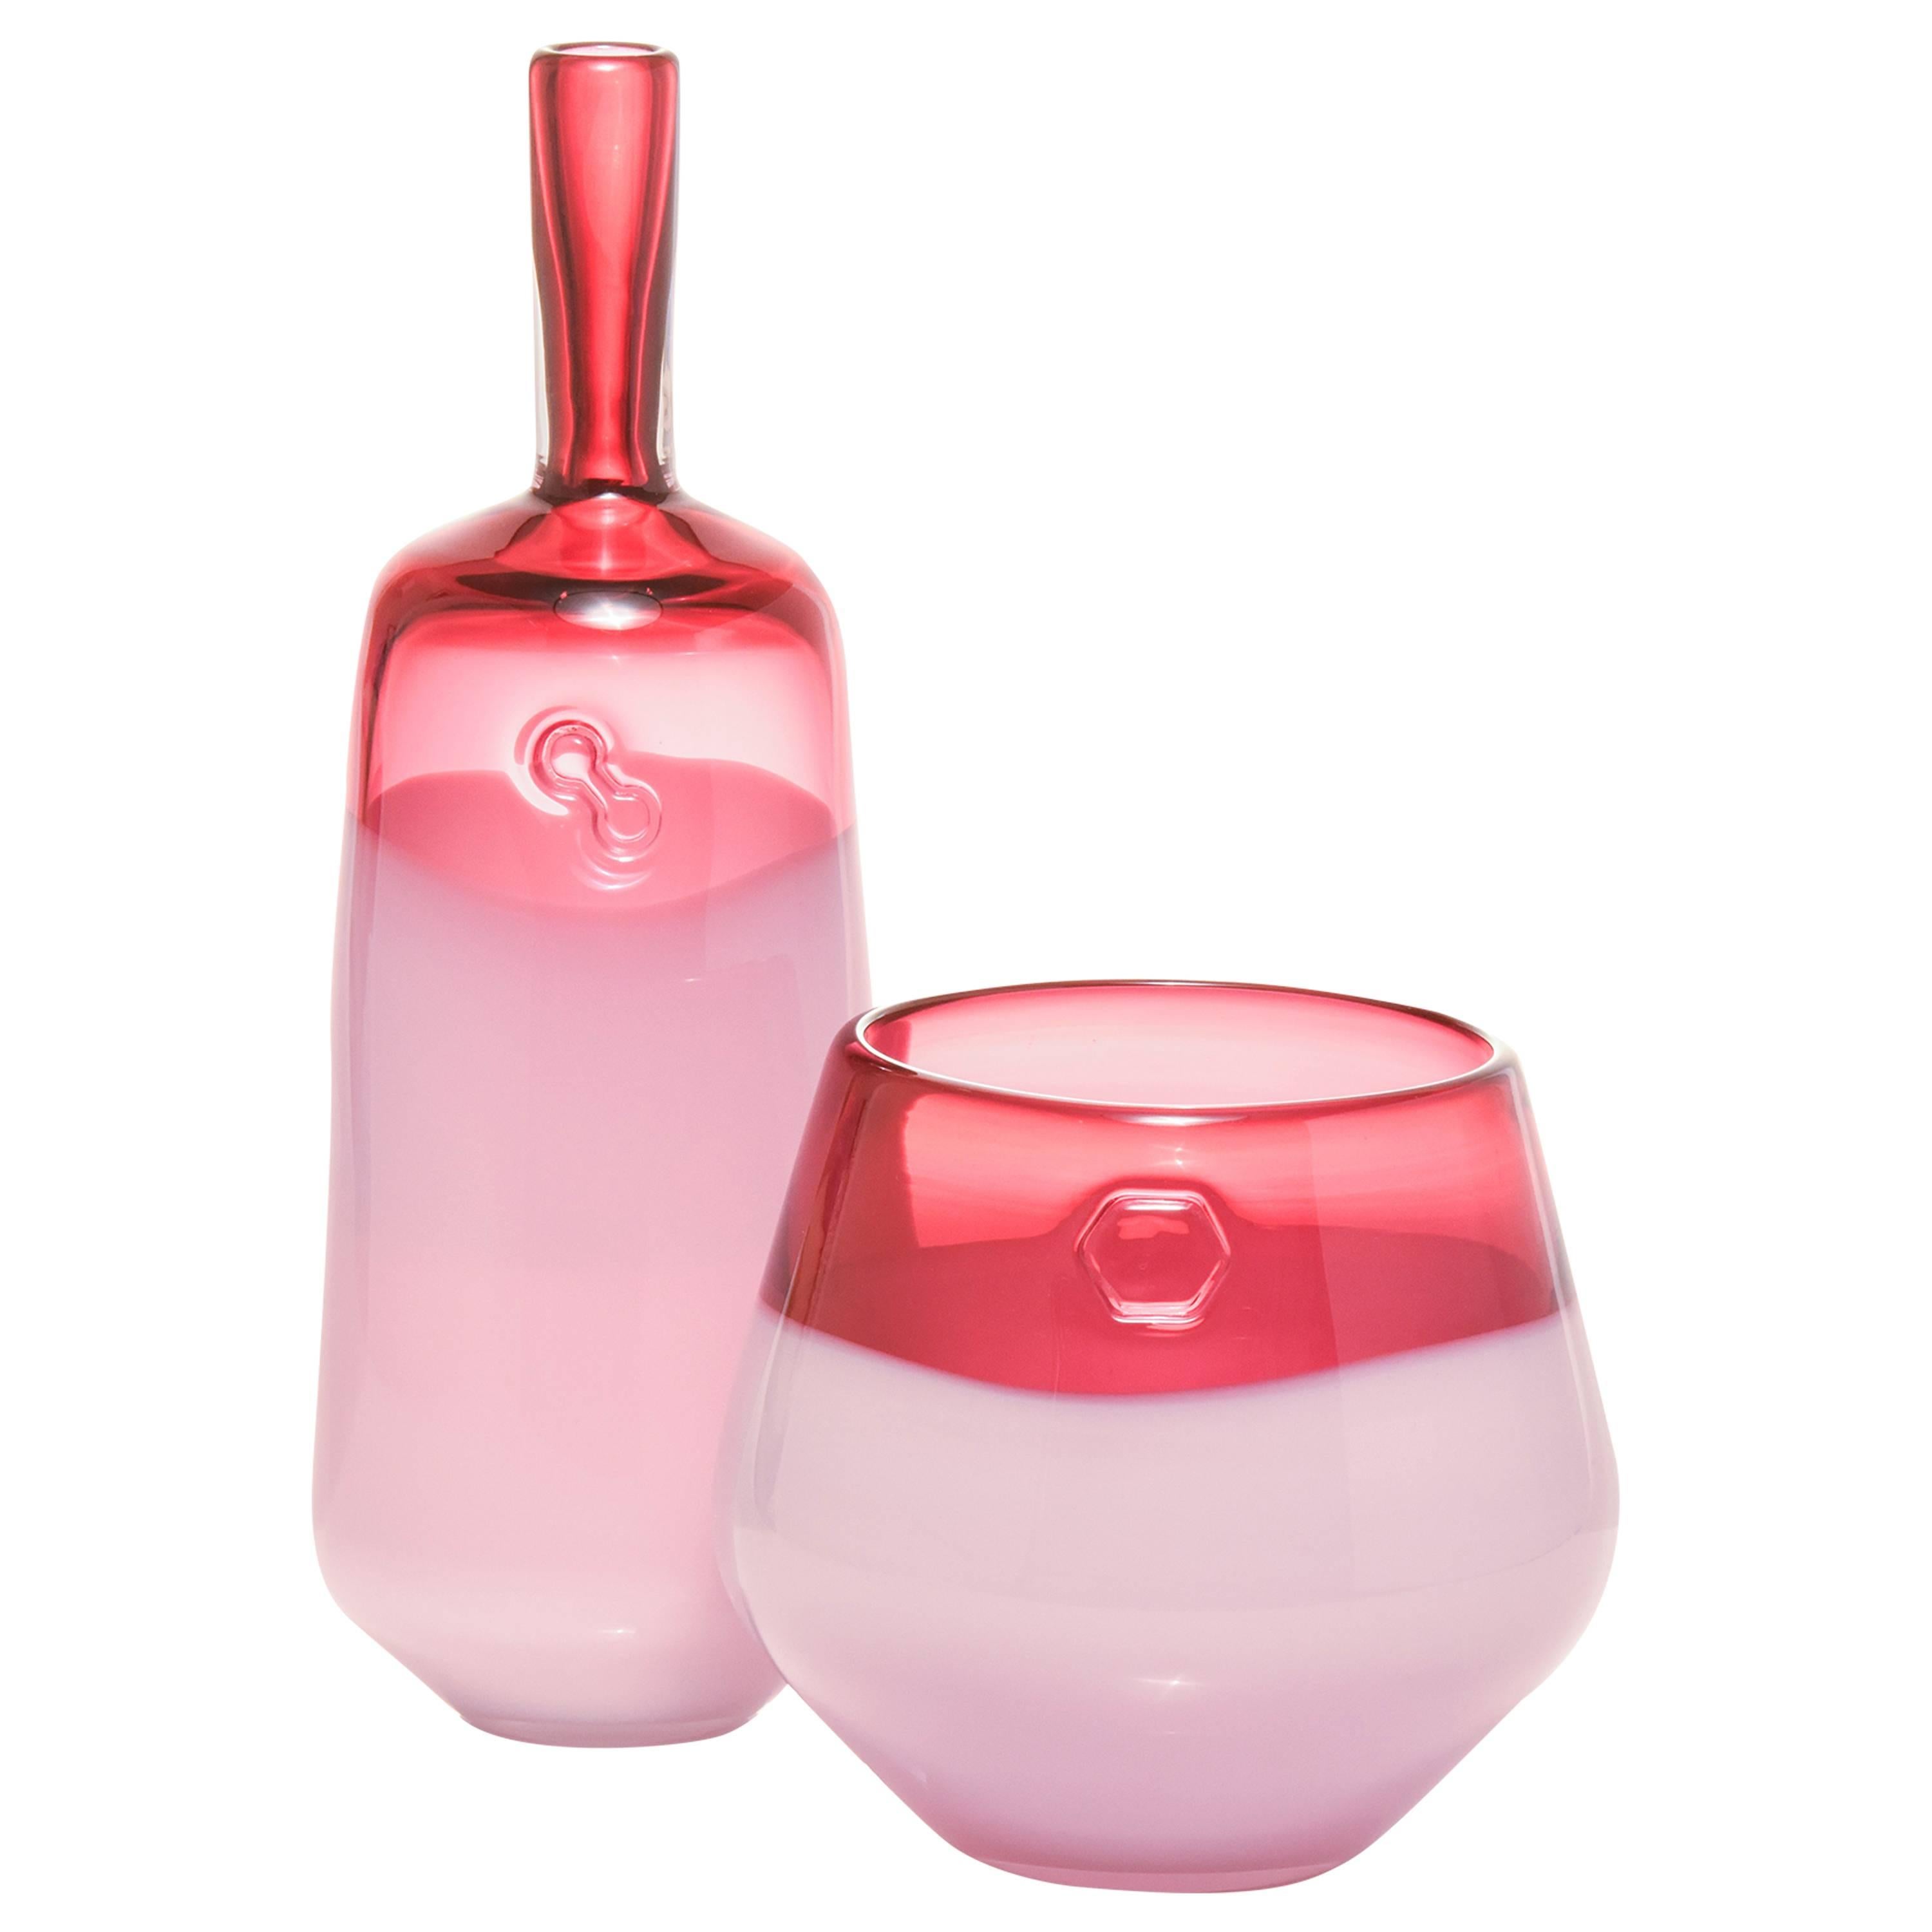 Branded Series in Ruby, Set of Two Handmade Contemporary Glass Vessels